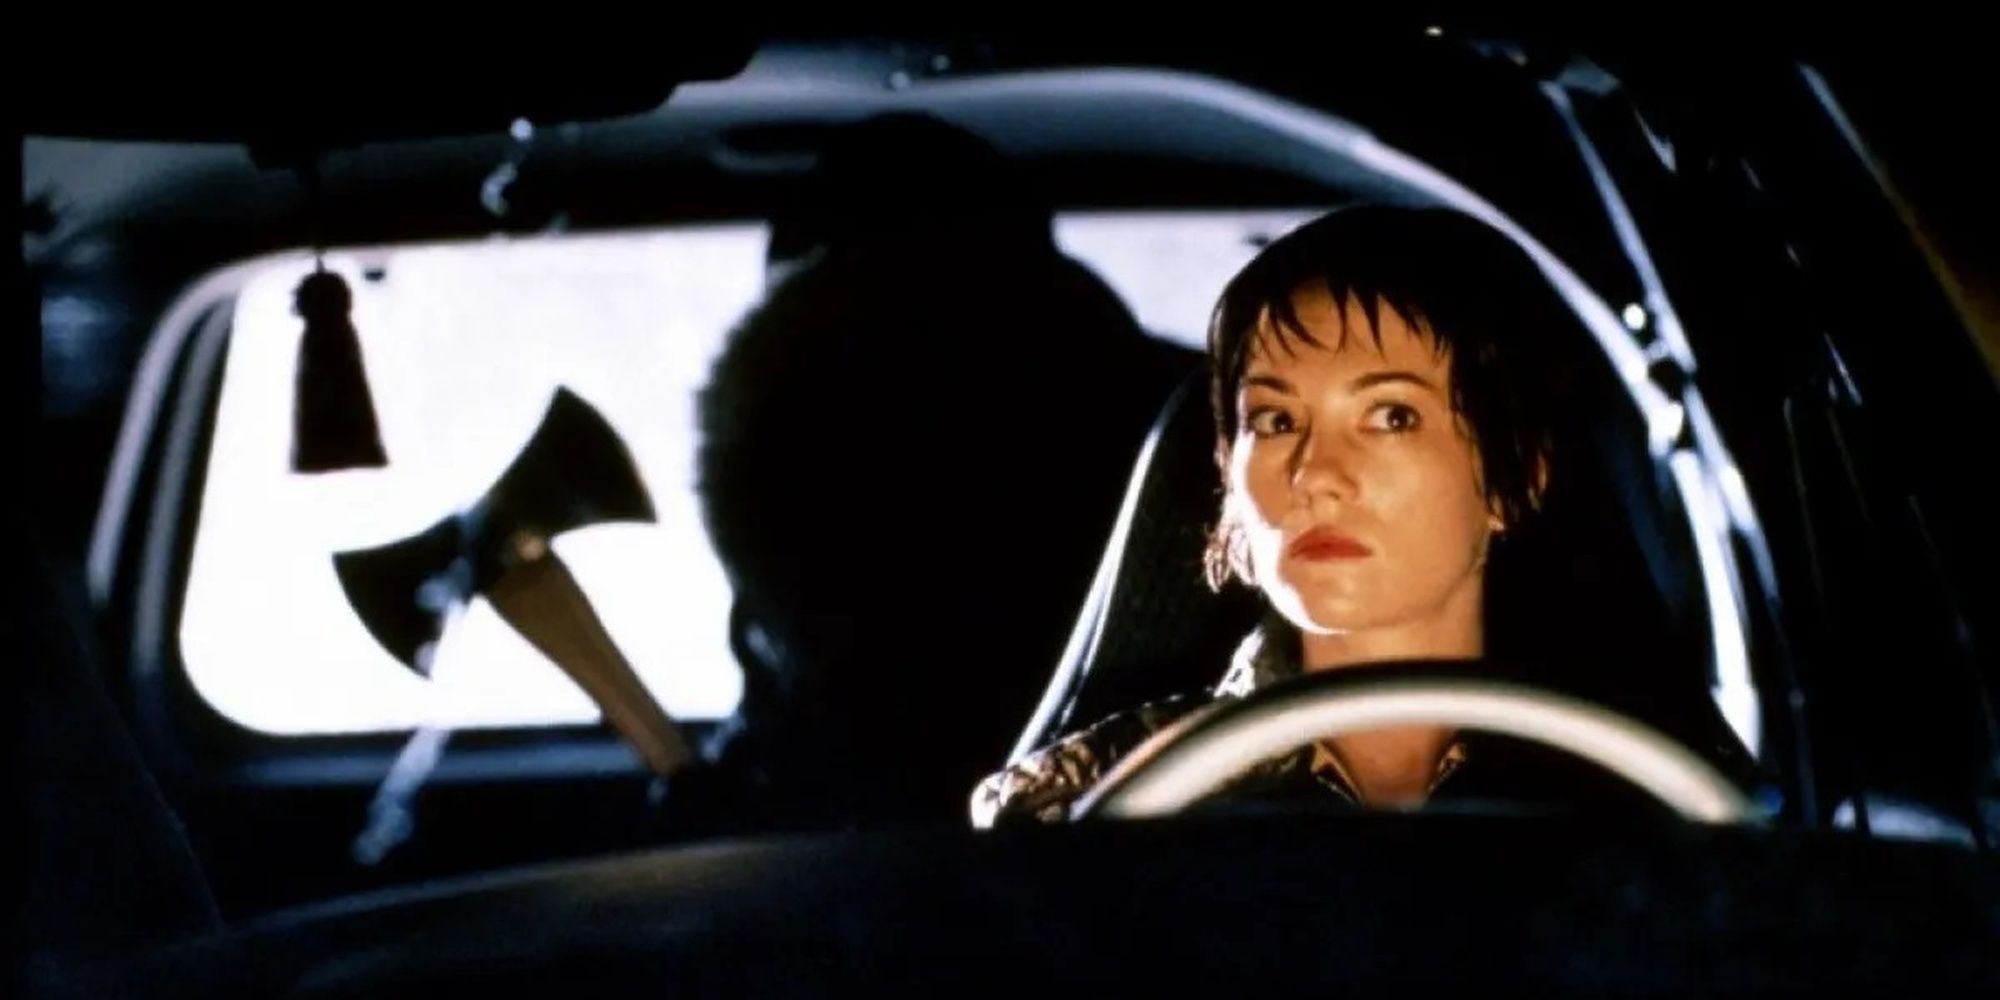 Natasha Gregson Wagner driving while a killer hides in the backseat in Urban Legend